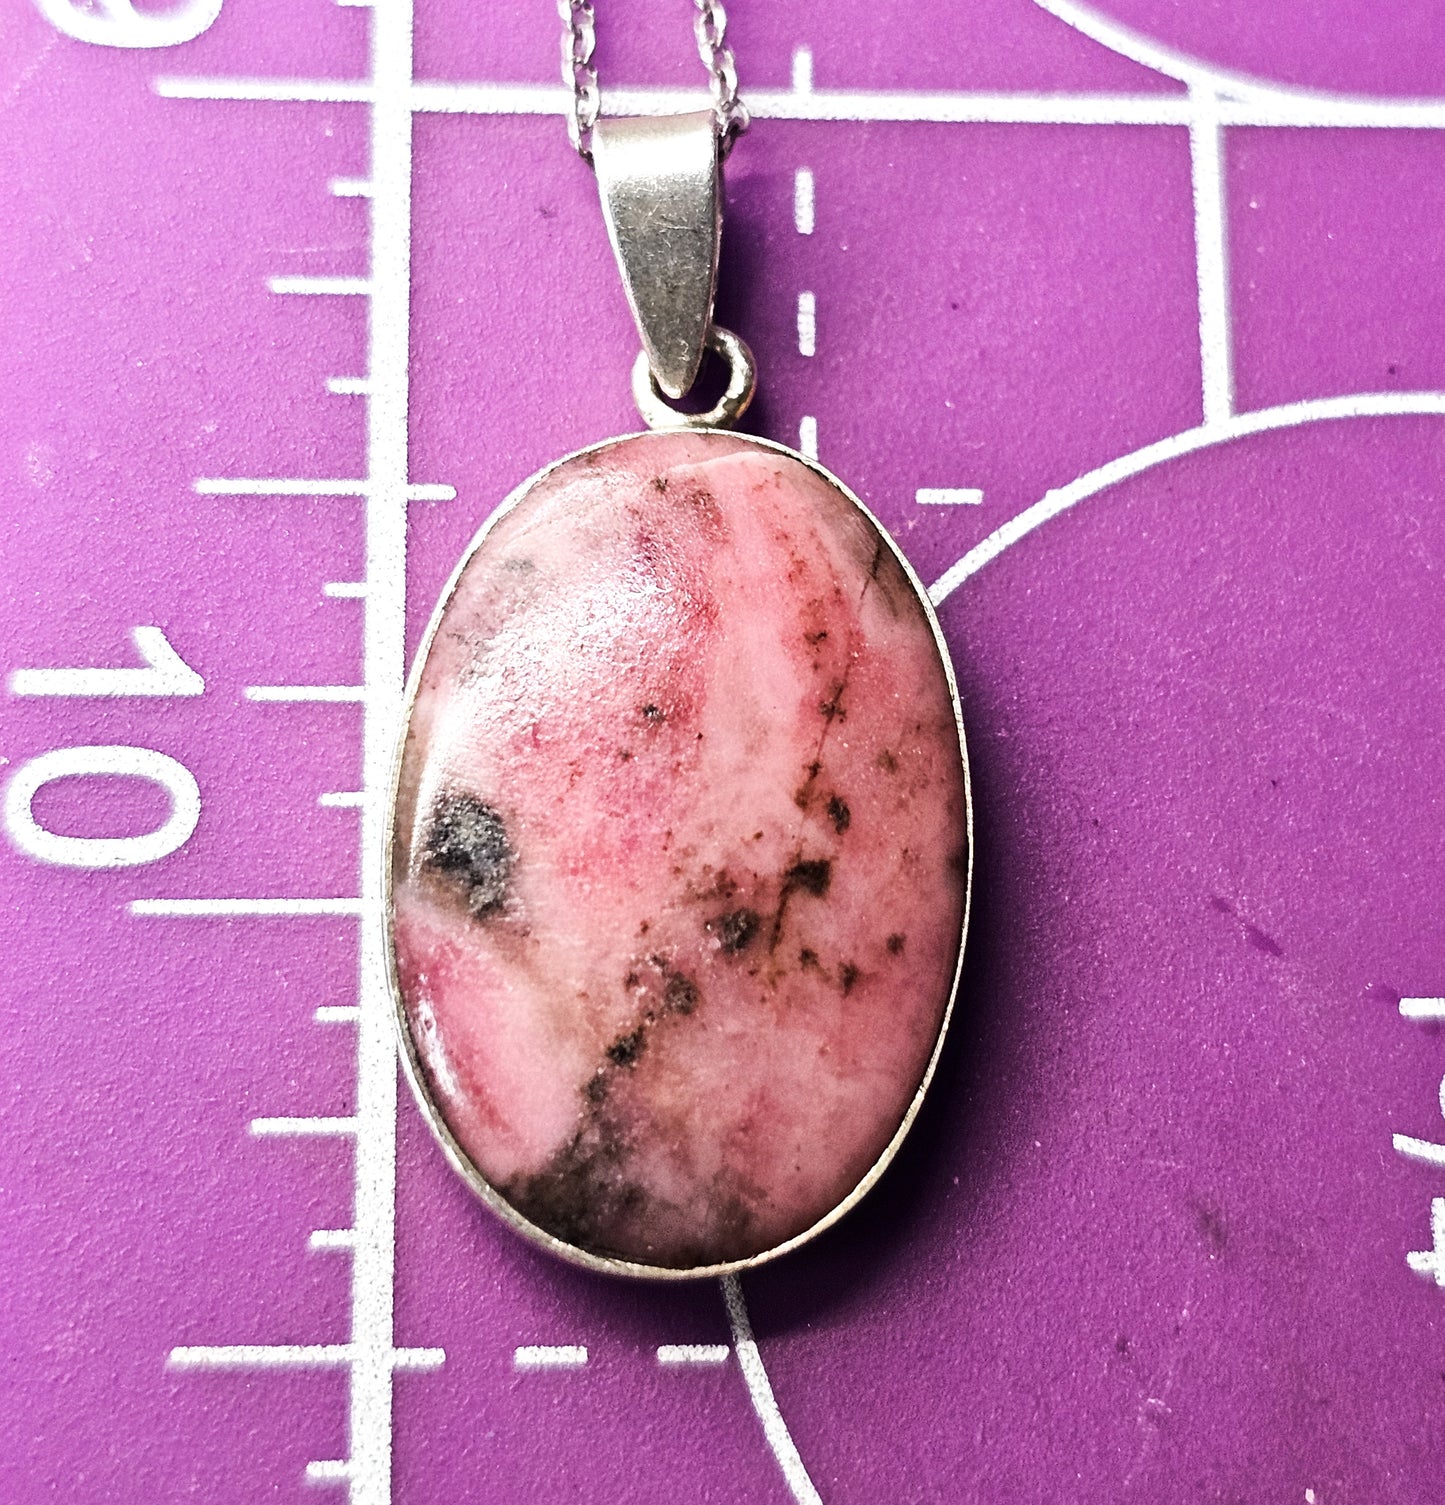 Rhodonite pink and black gemstone sterling silver pendant necklace